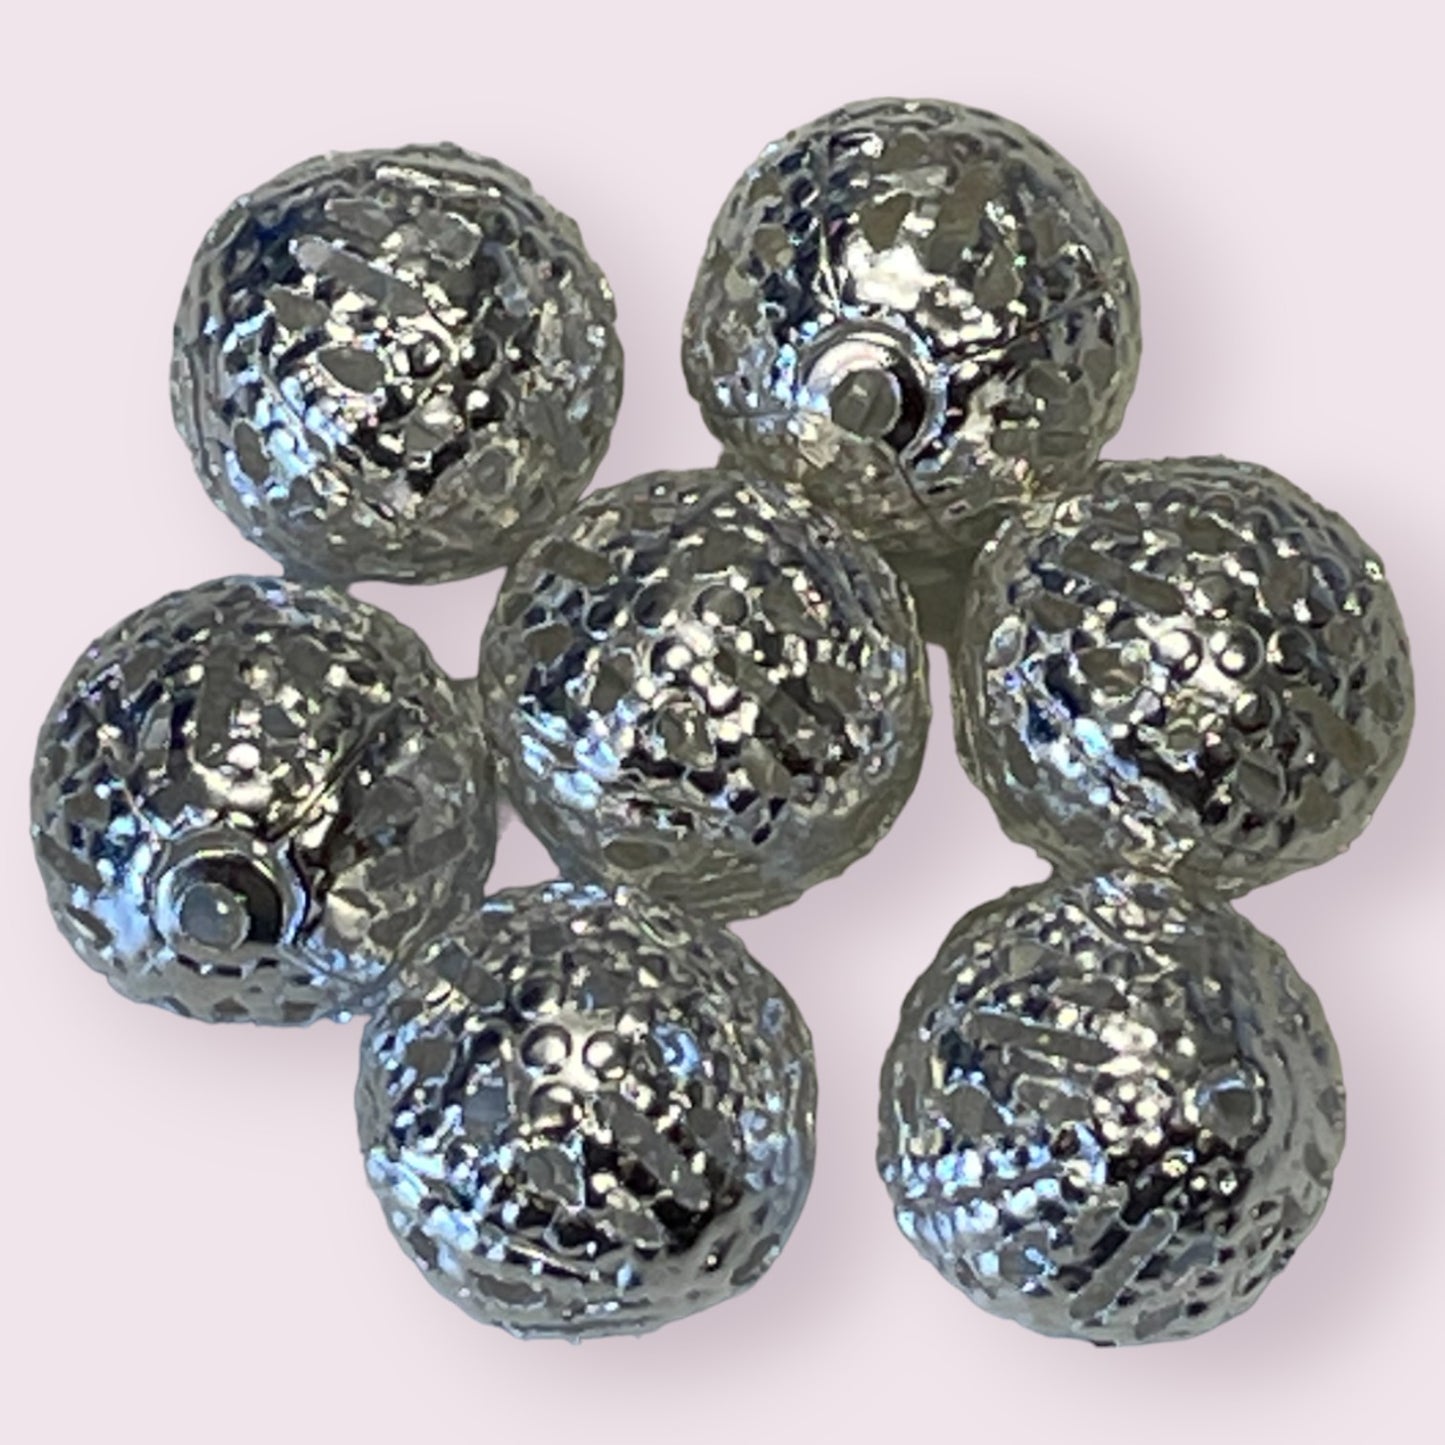 Silver Filigree Beads - metal base - 6mm, 8mm and 10mm - 50 pack